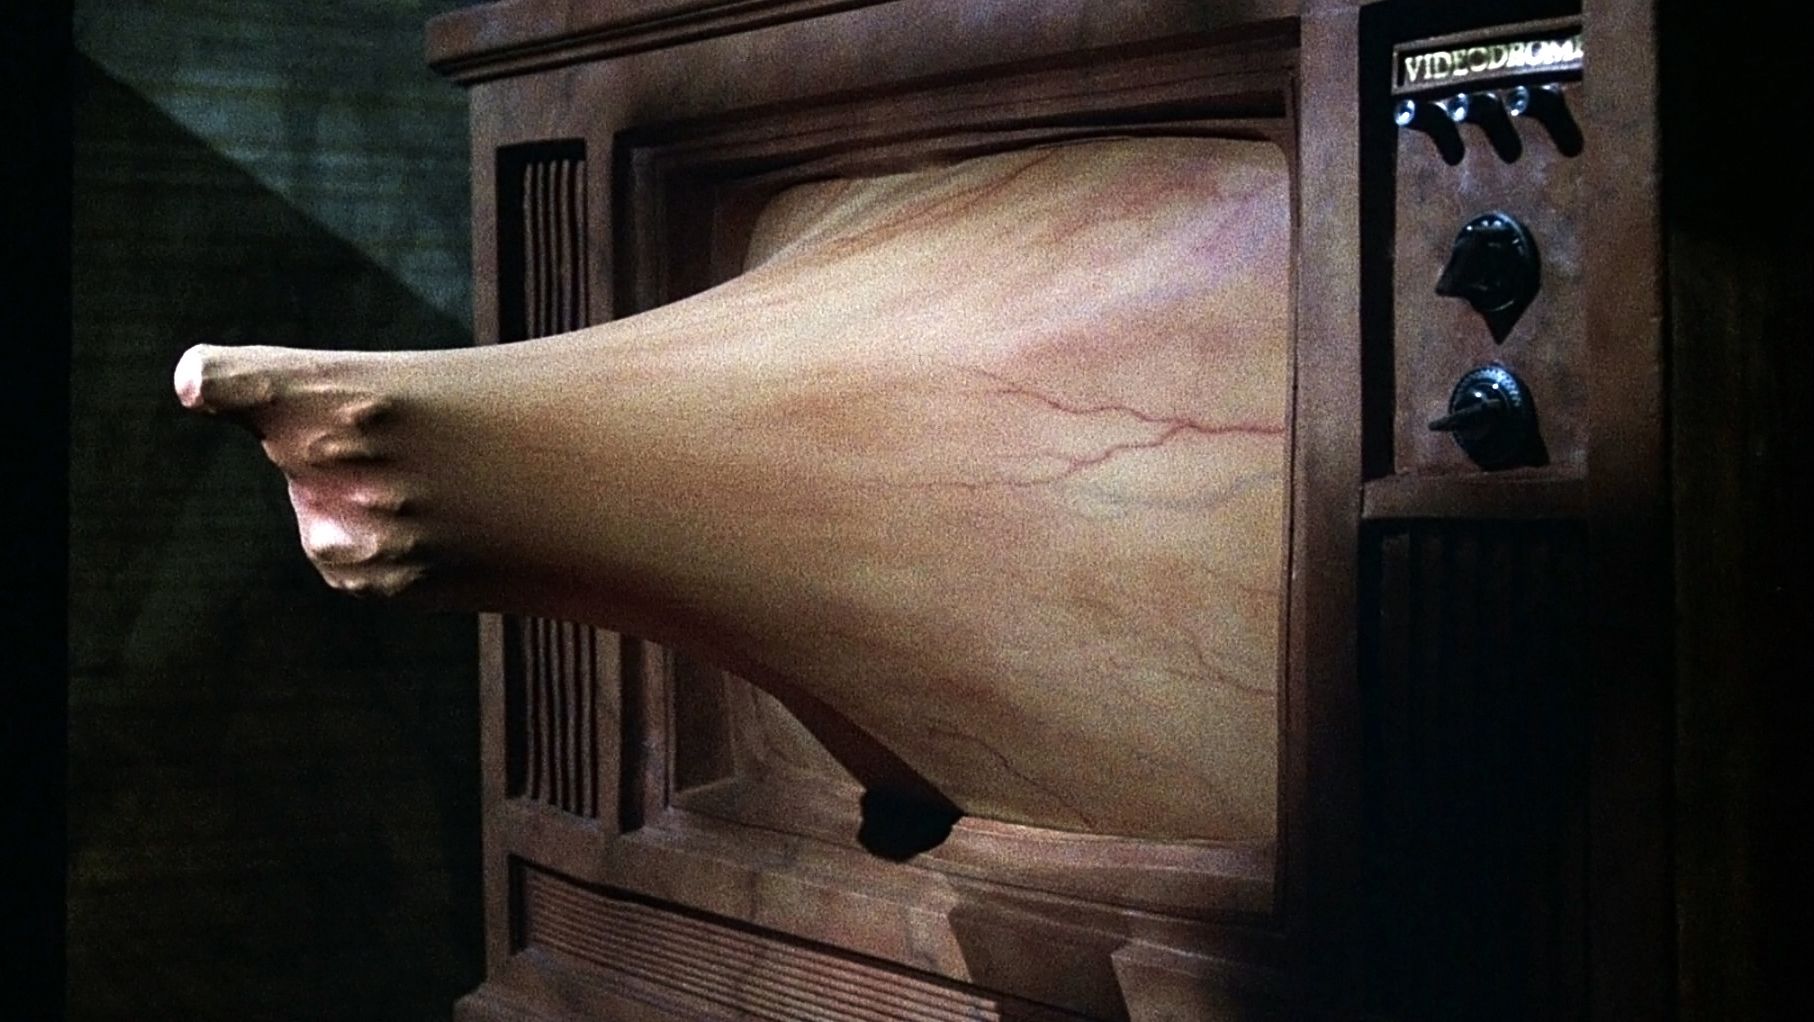 A mass of flesh extending from a television set in the horror movie Videodrome.